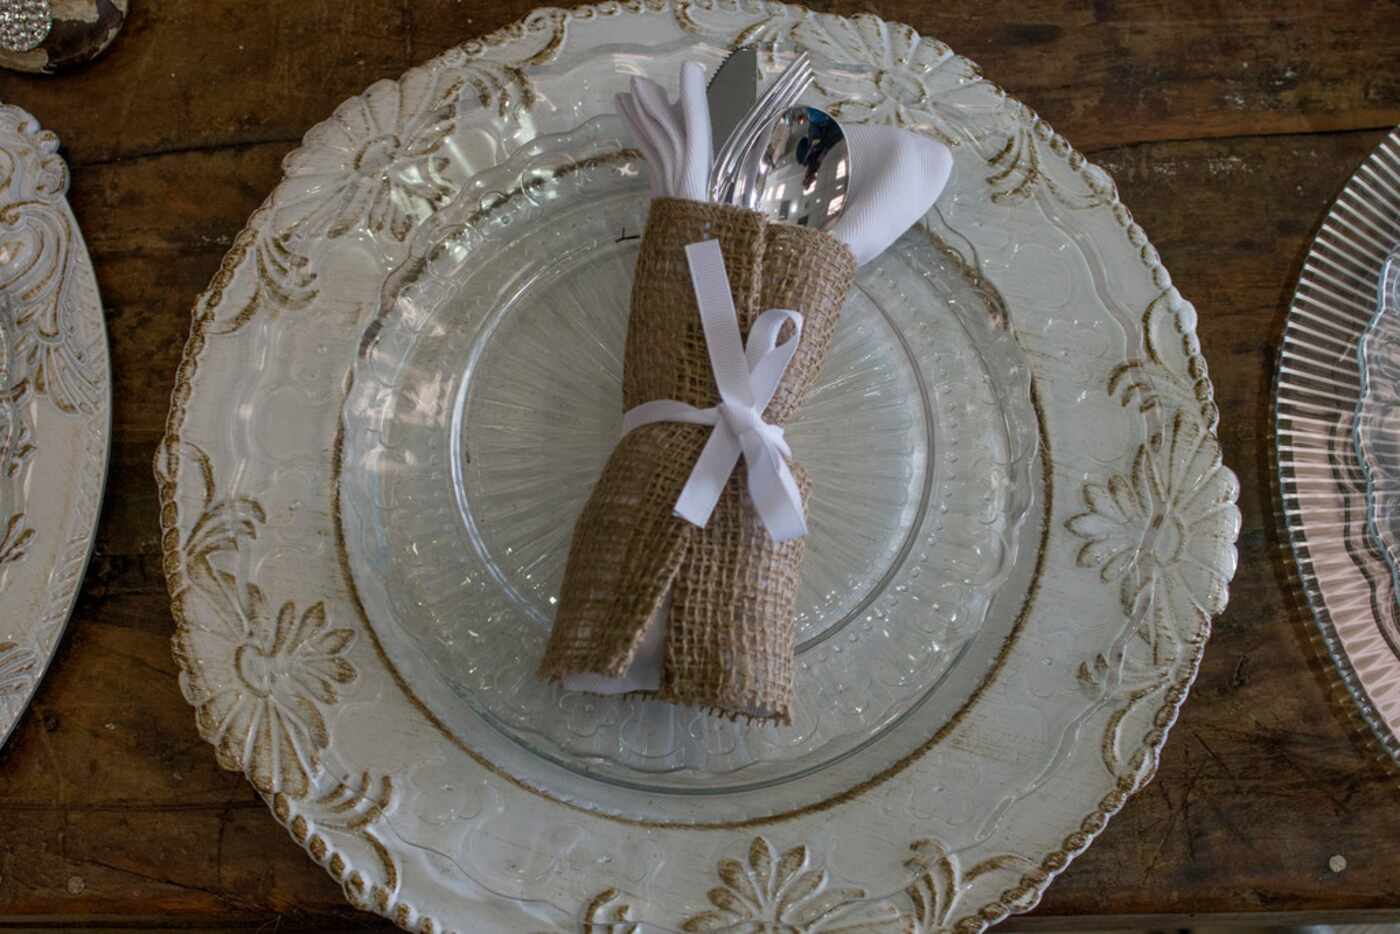 A place setting at Sweet Pickins at Preston Shopping Center in Dallas.